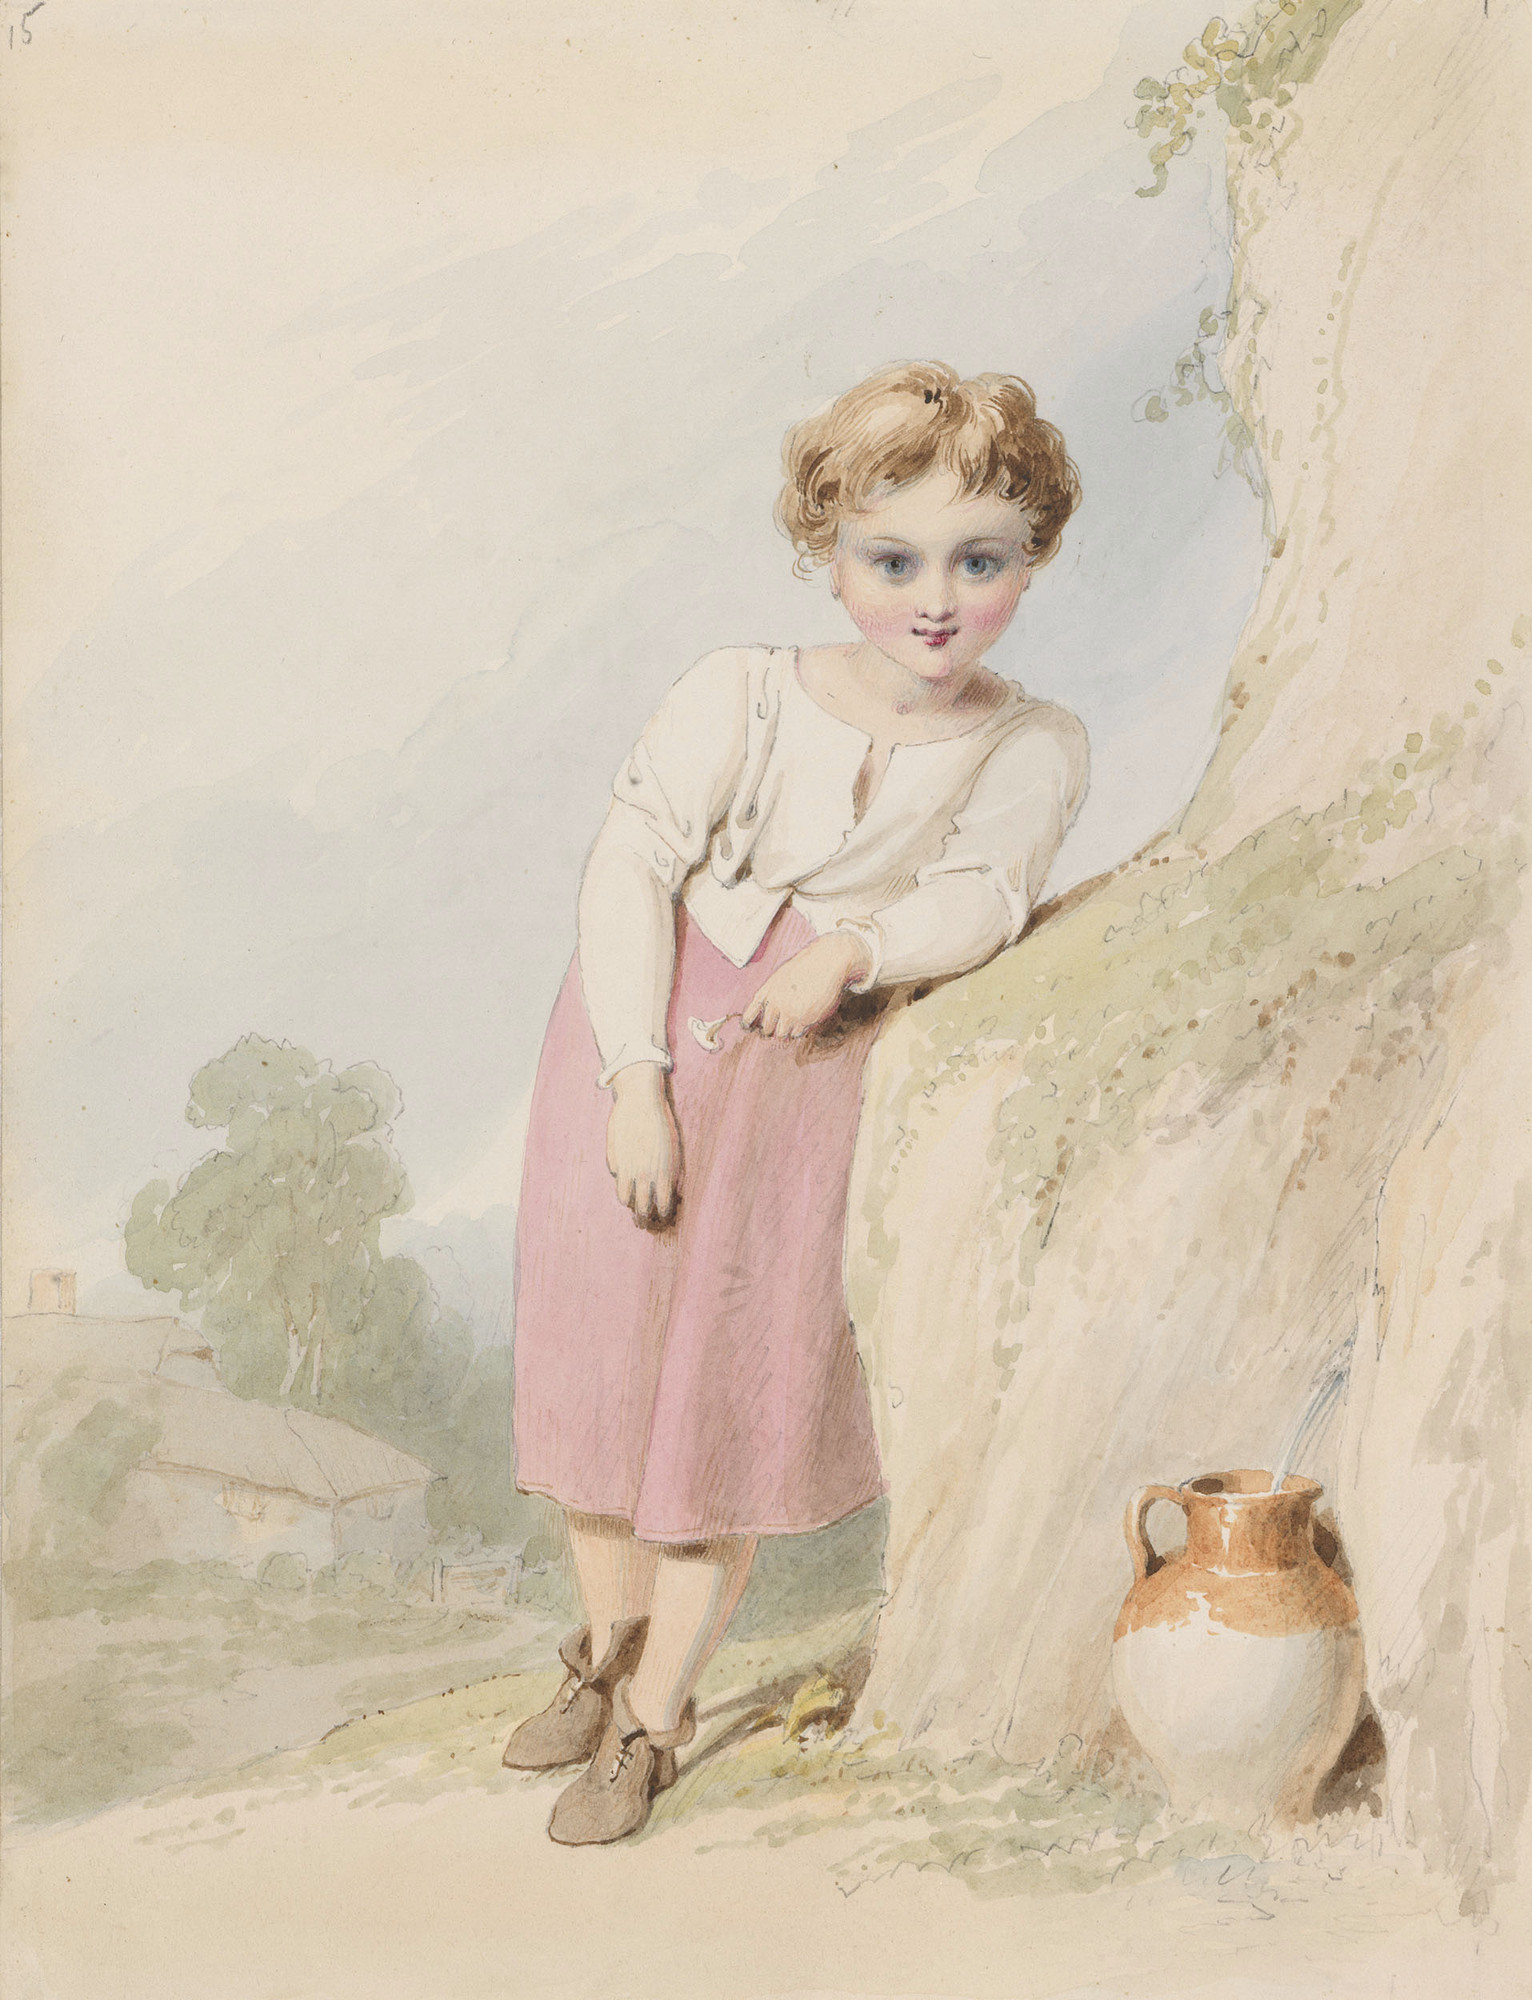 A watercolour showing a young girl filling a pitcher with water from a spring. She is shown full-length, facing forward and leaning on a rock. She is holding a small wild flower in one hand. Princess Victoria, later Queen Victoria, received her first draw